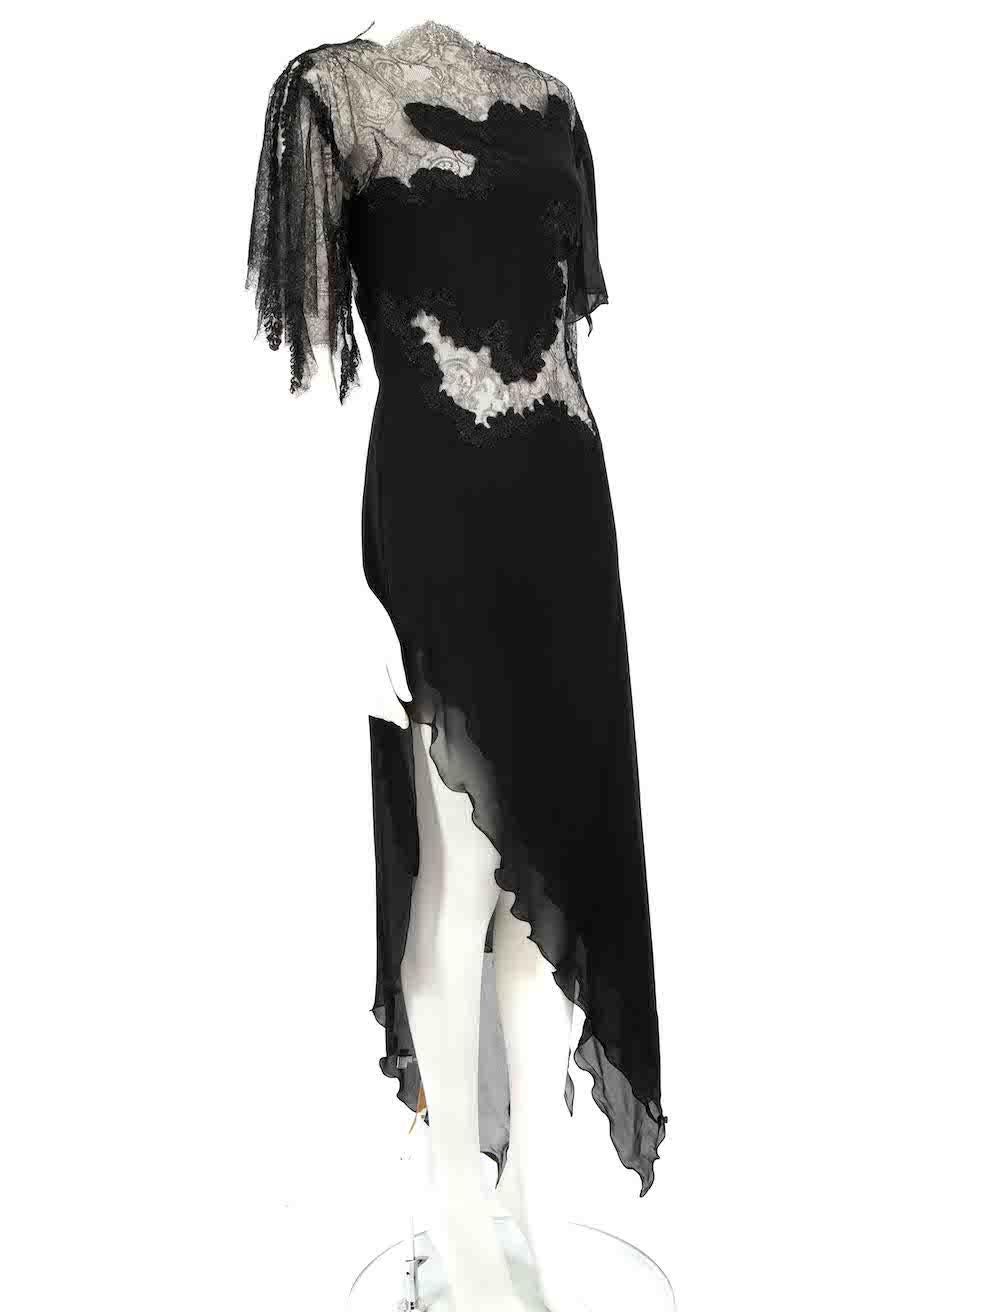 CONDITION is Very good. Hardly any visible wear to dress is evident on this used Julien Macdonald designer resale item.
 
 
 
 Details
 
 
 AW 2002 
 
 Vintage
 
 Black
 
 Silk
 
 Dress
 
 Lace panel with metallic
 
 See through
 
 Short sleeves
 
